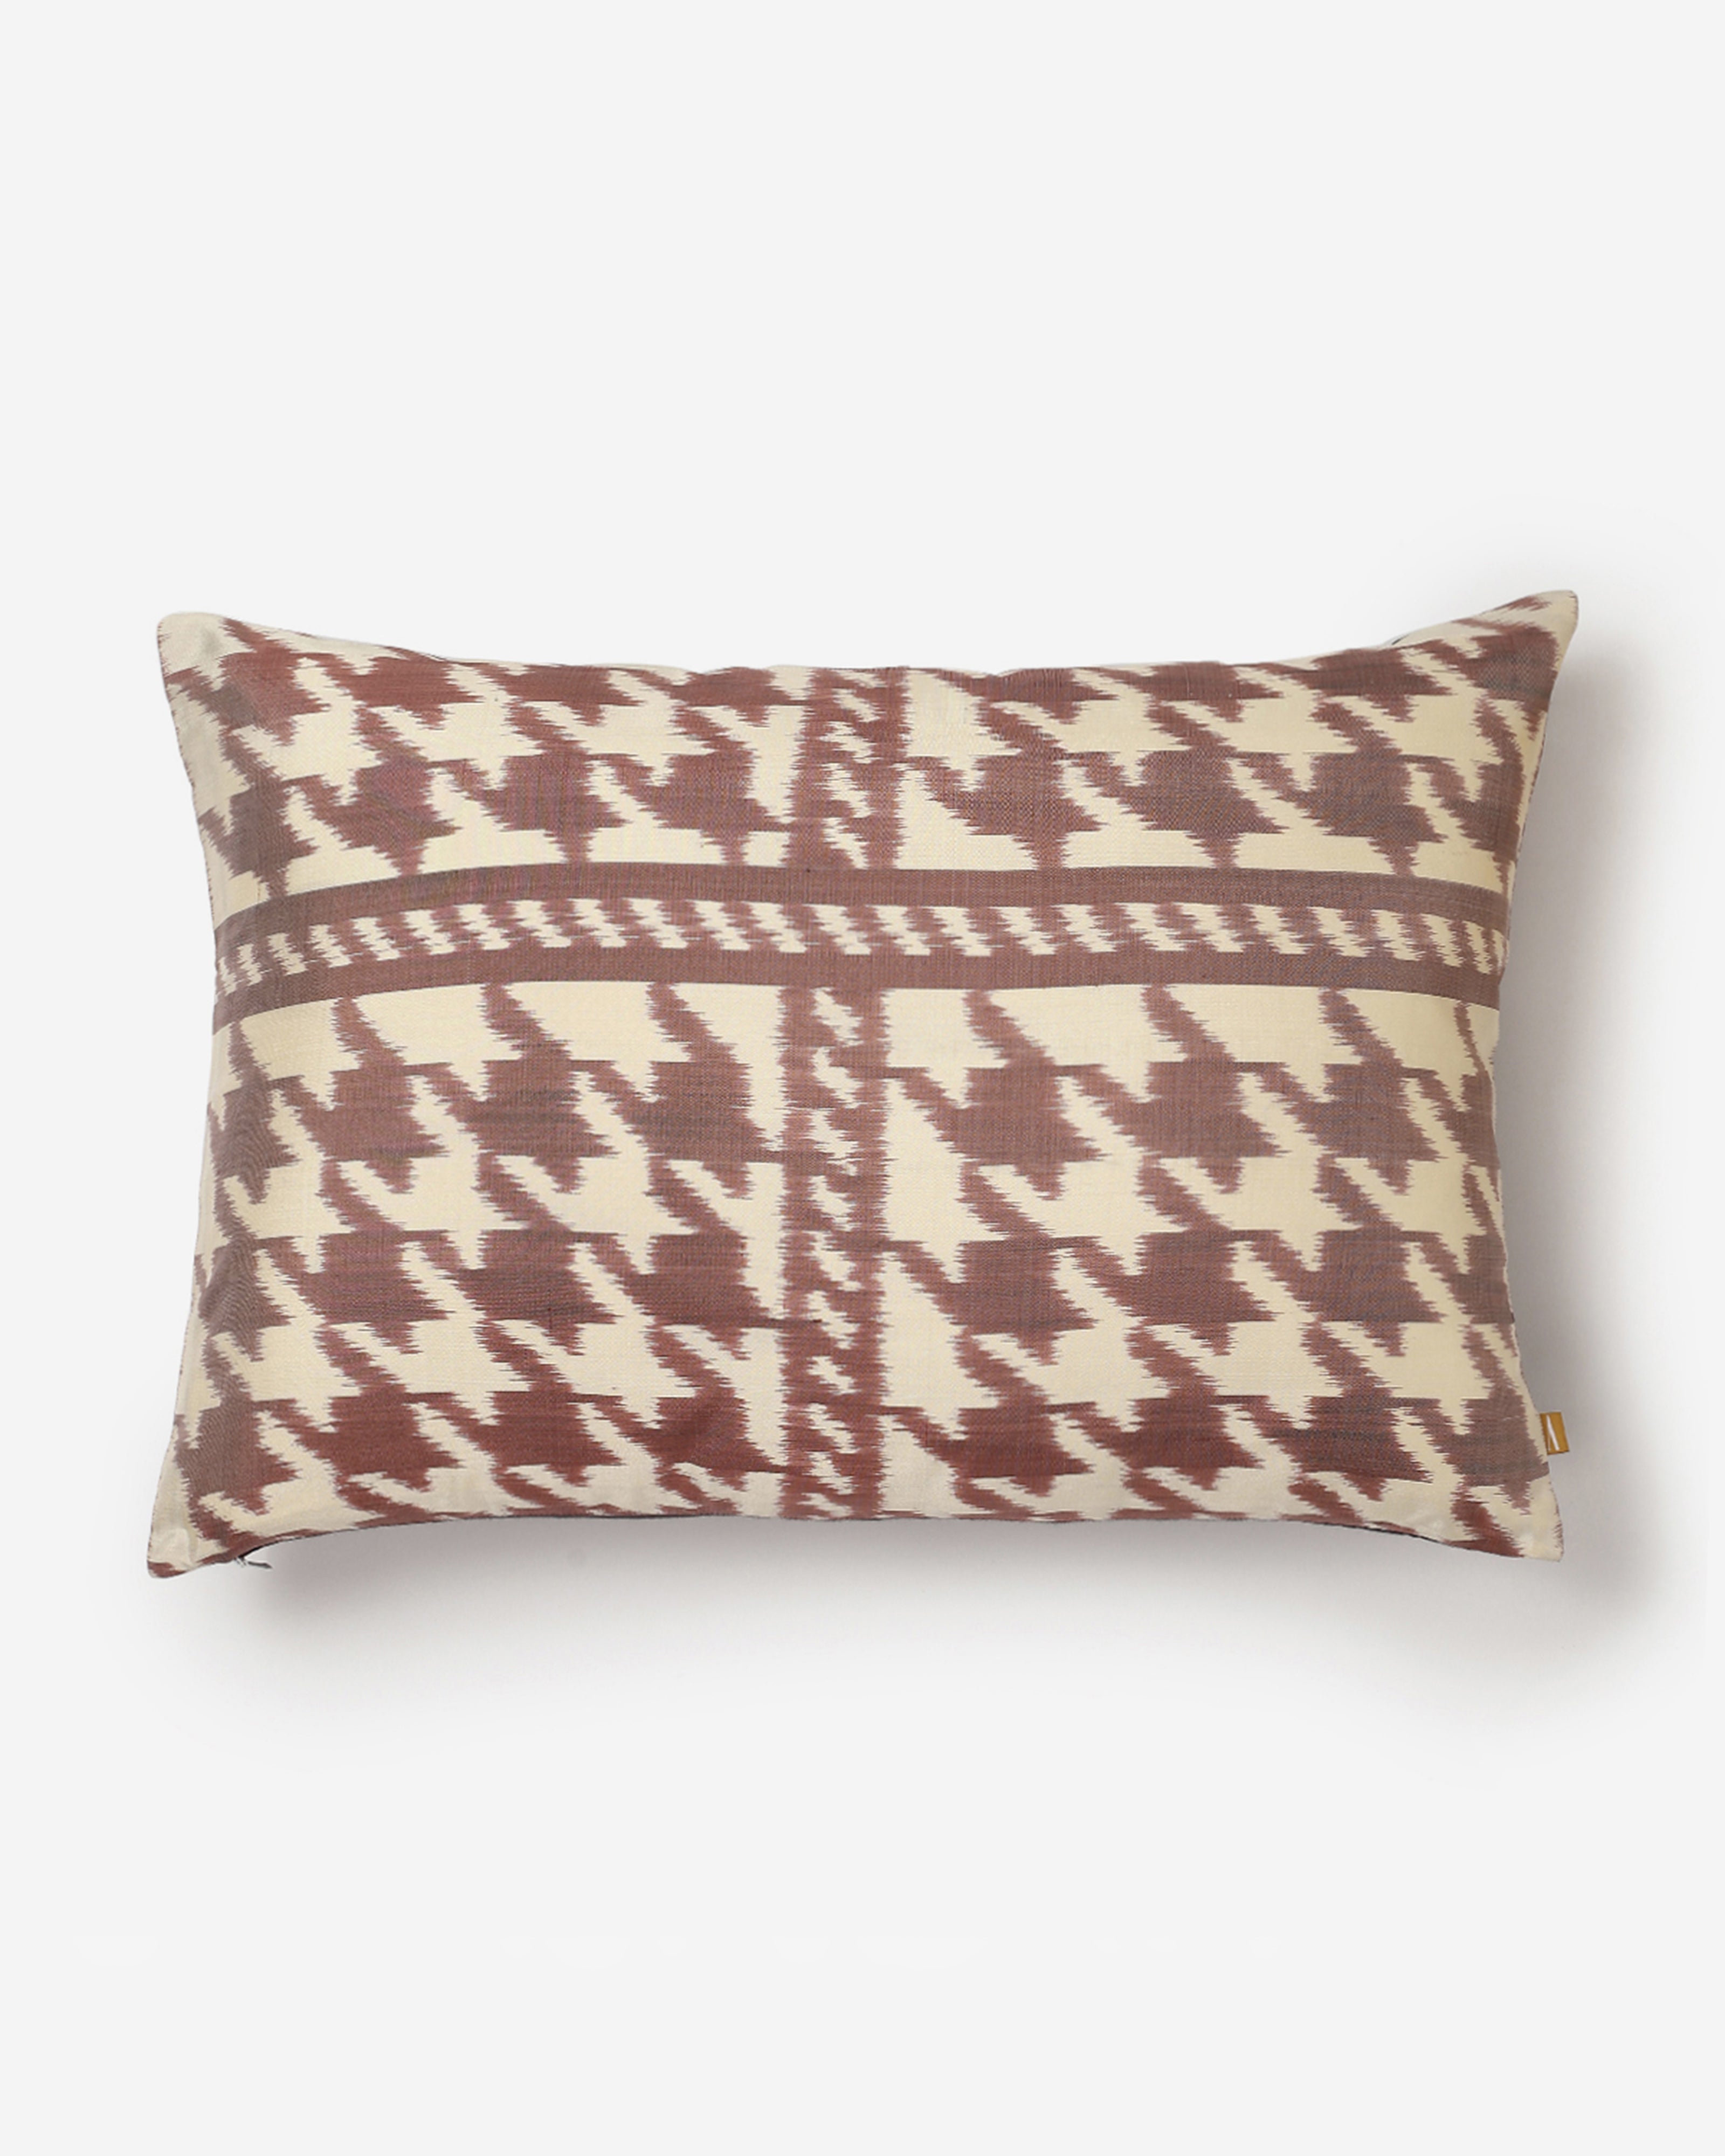 Hounds Tooth Weft Ikat Silk Cushion Cover